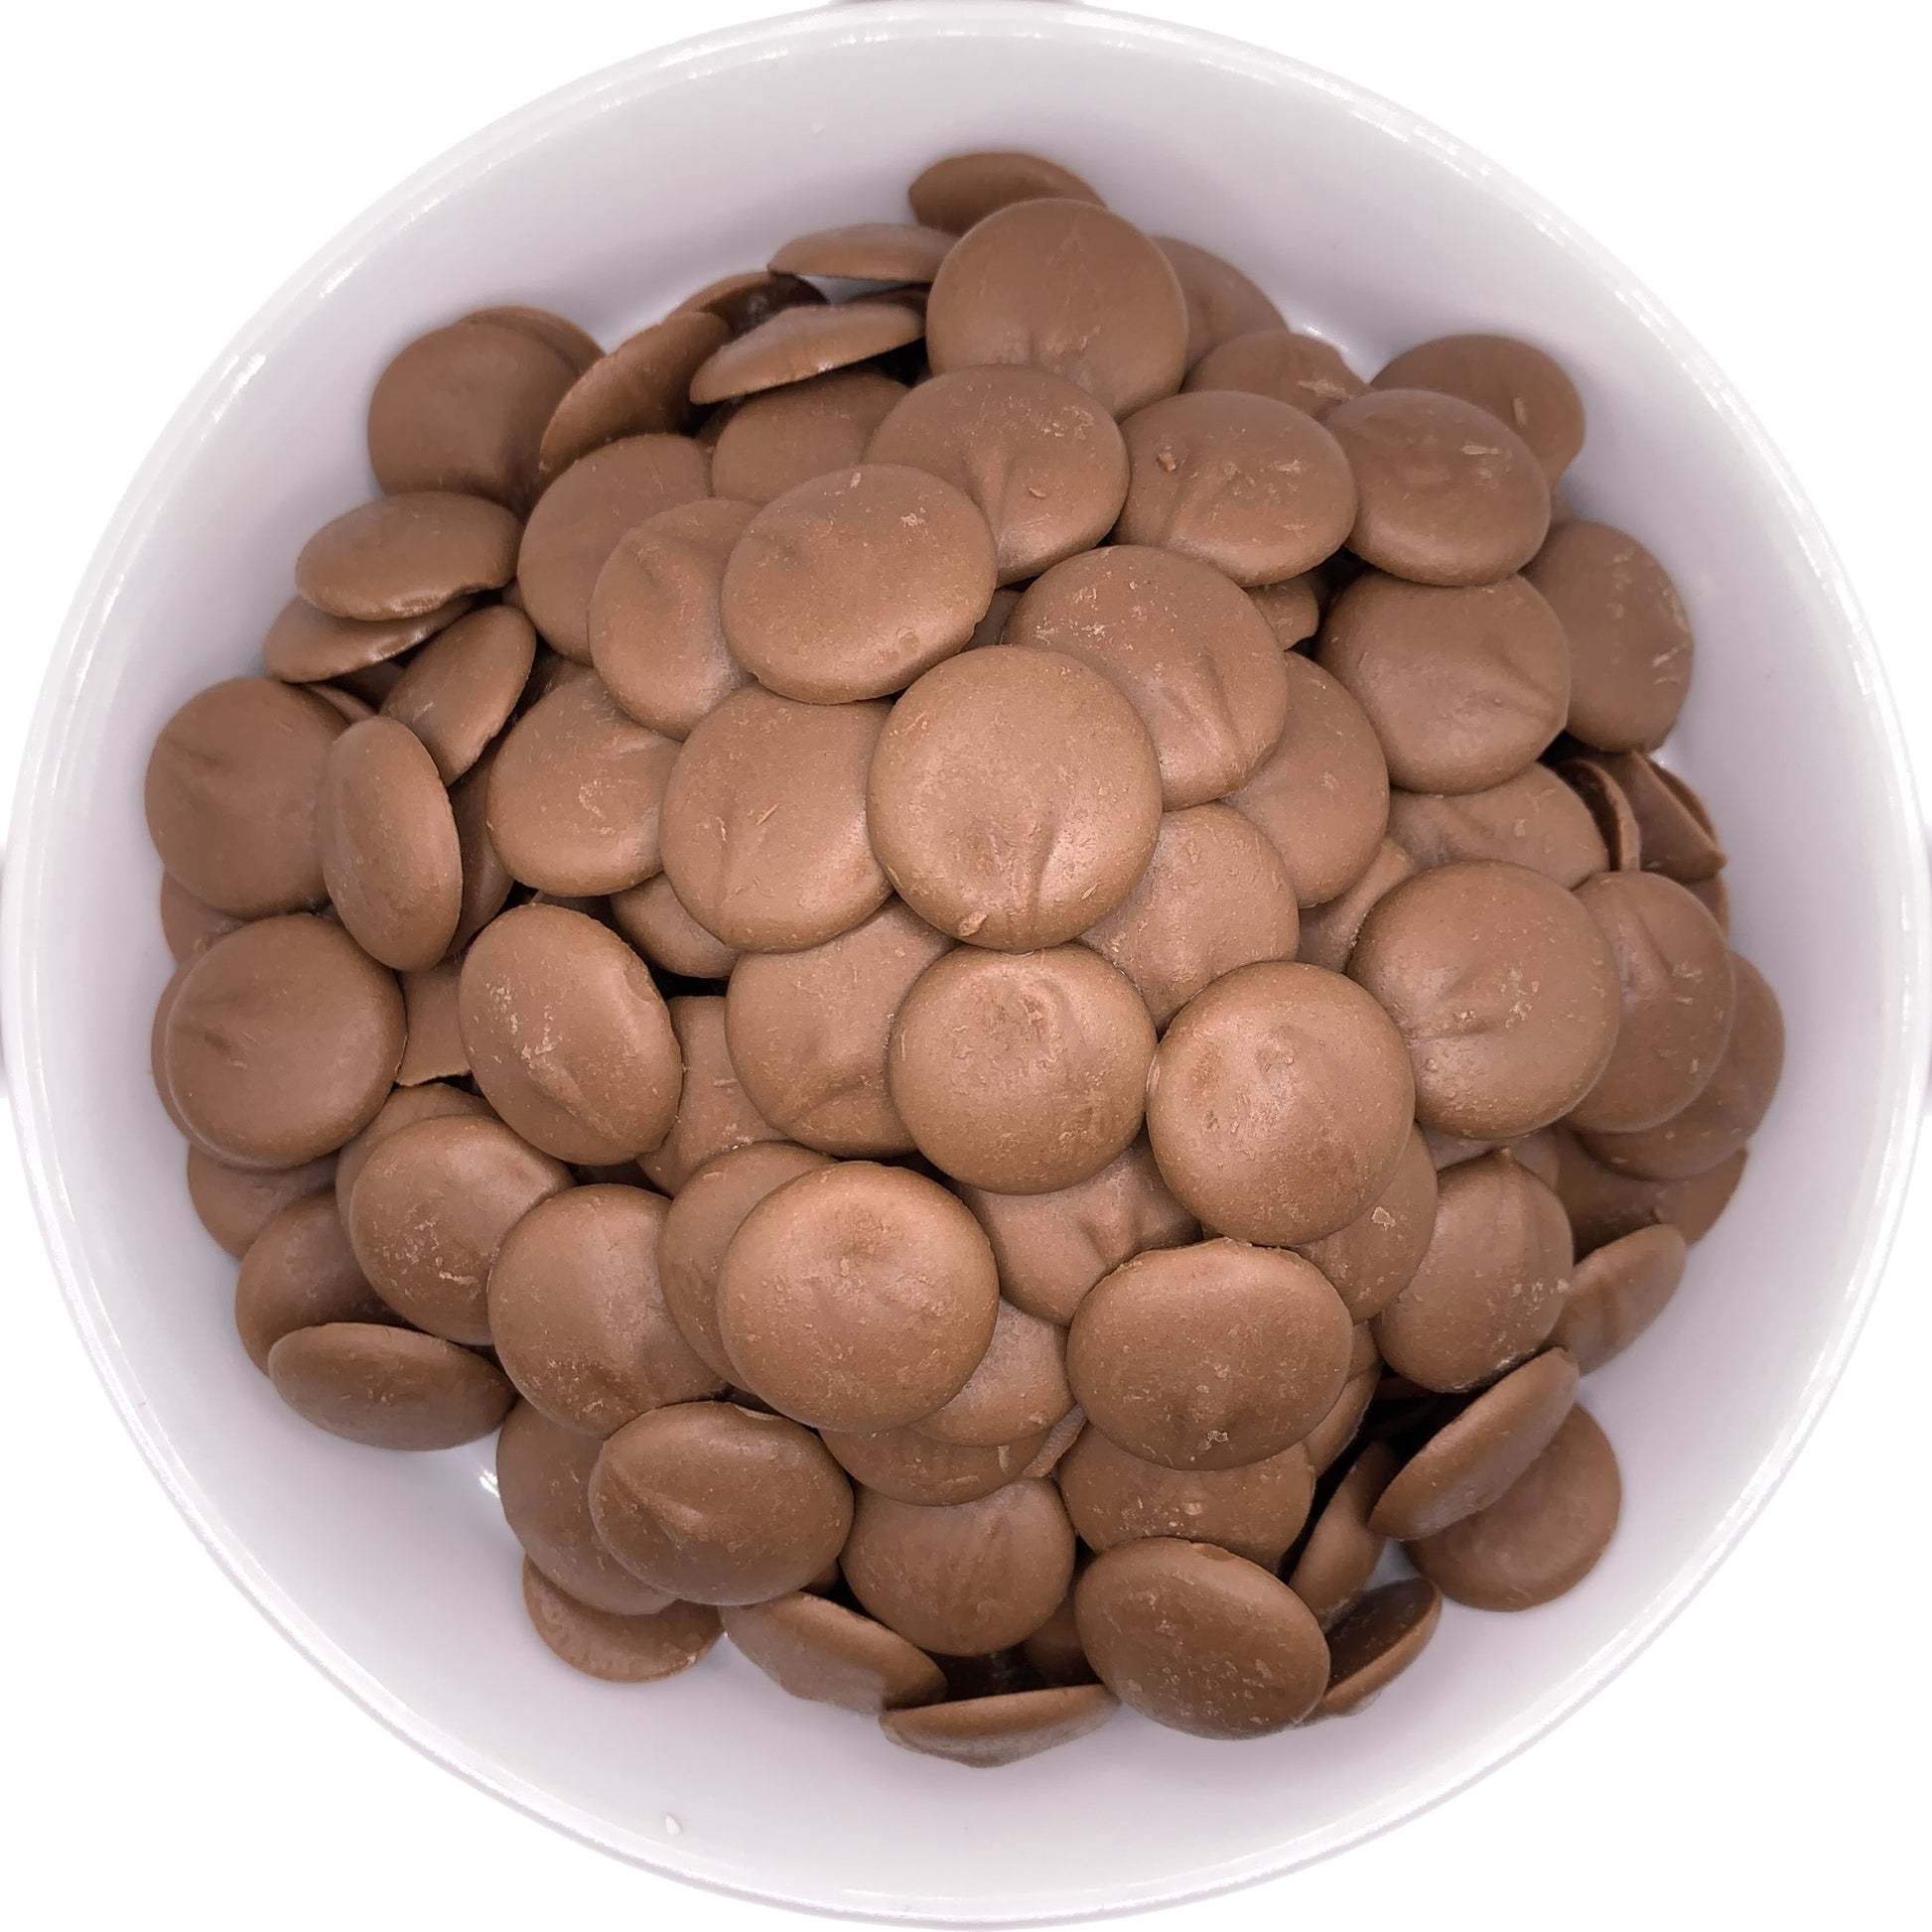 A white bowl overflowing with Ambrosia Landmark Milk Chocolate Coating wafers, capturing the rich and creamy milk chocolate perfect for coating confections, from elegant truffles to festive chocolate-dipped strawberries.